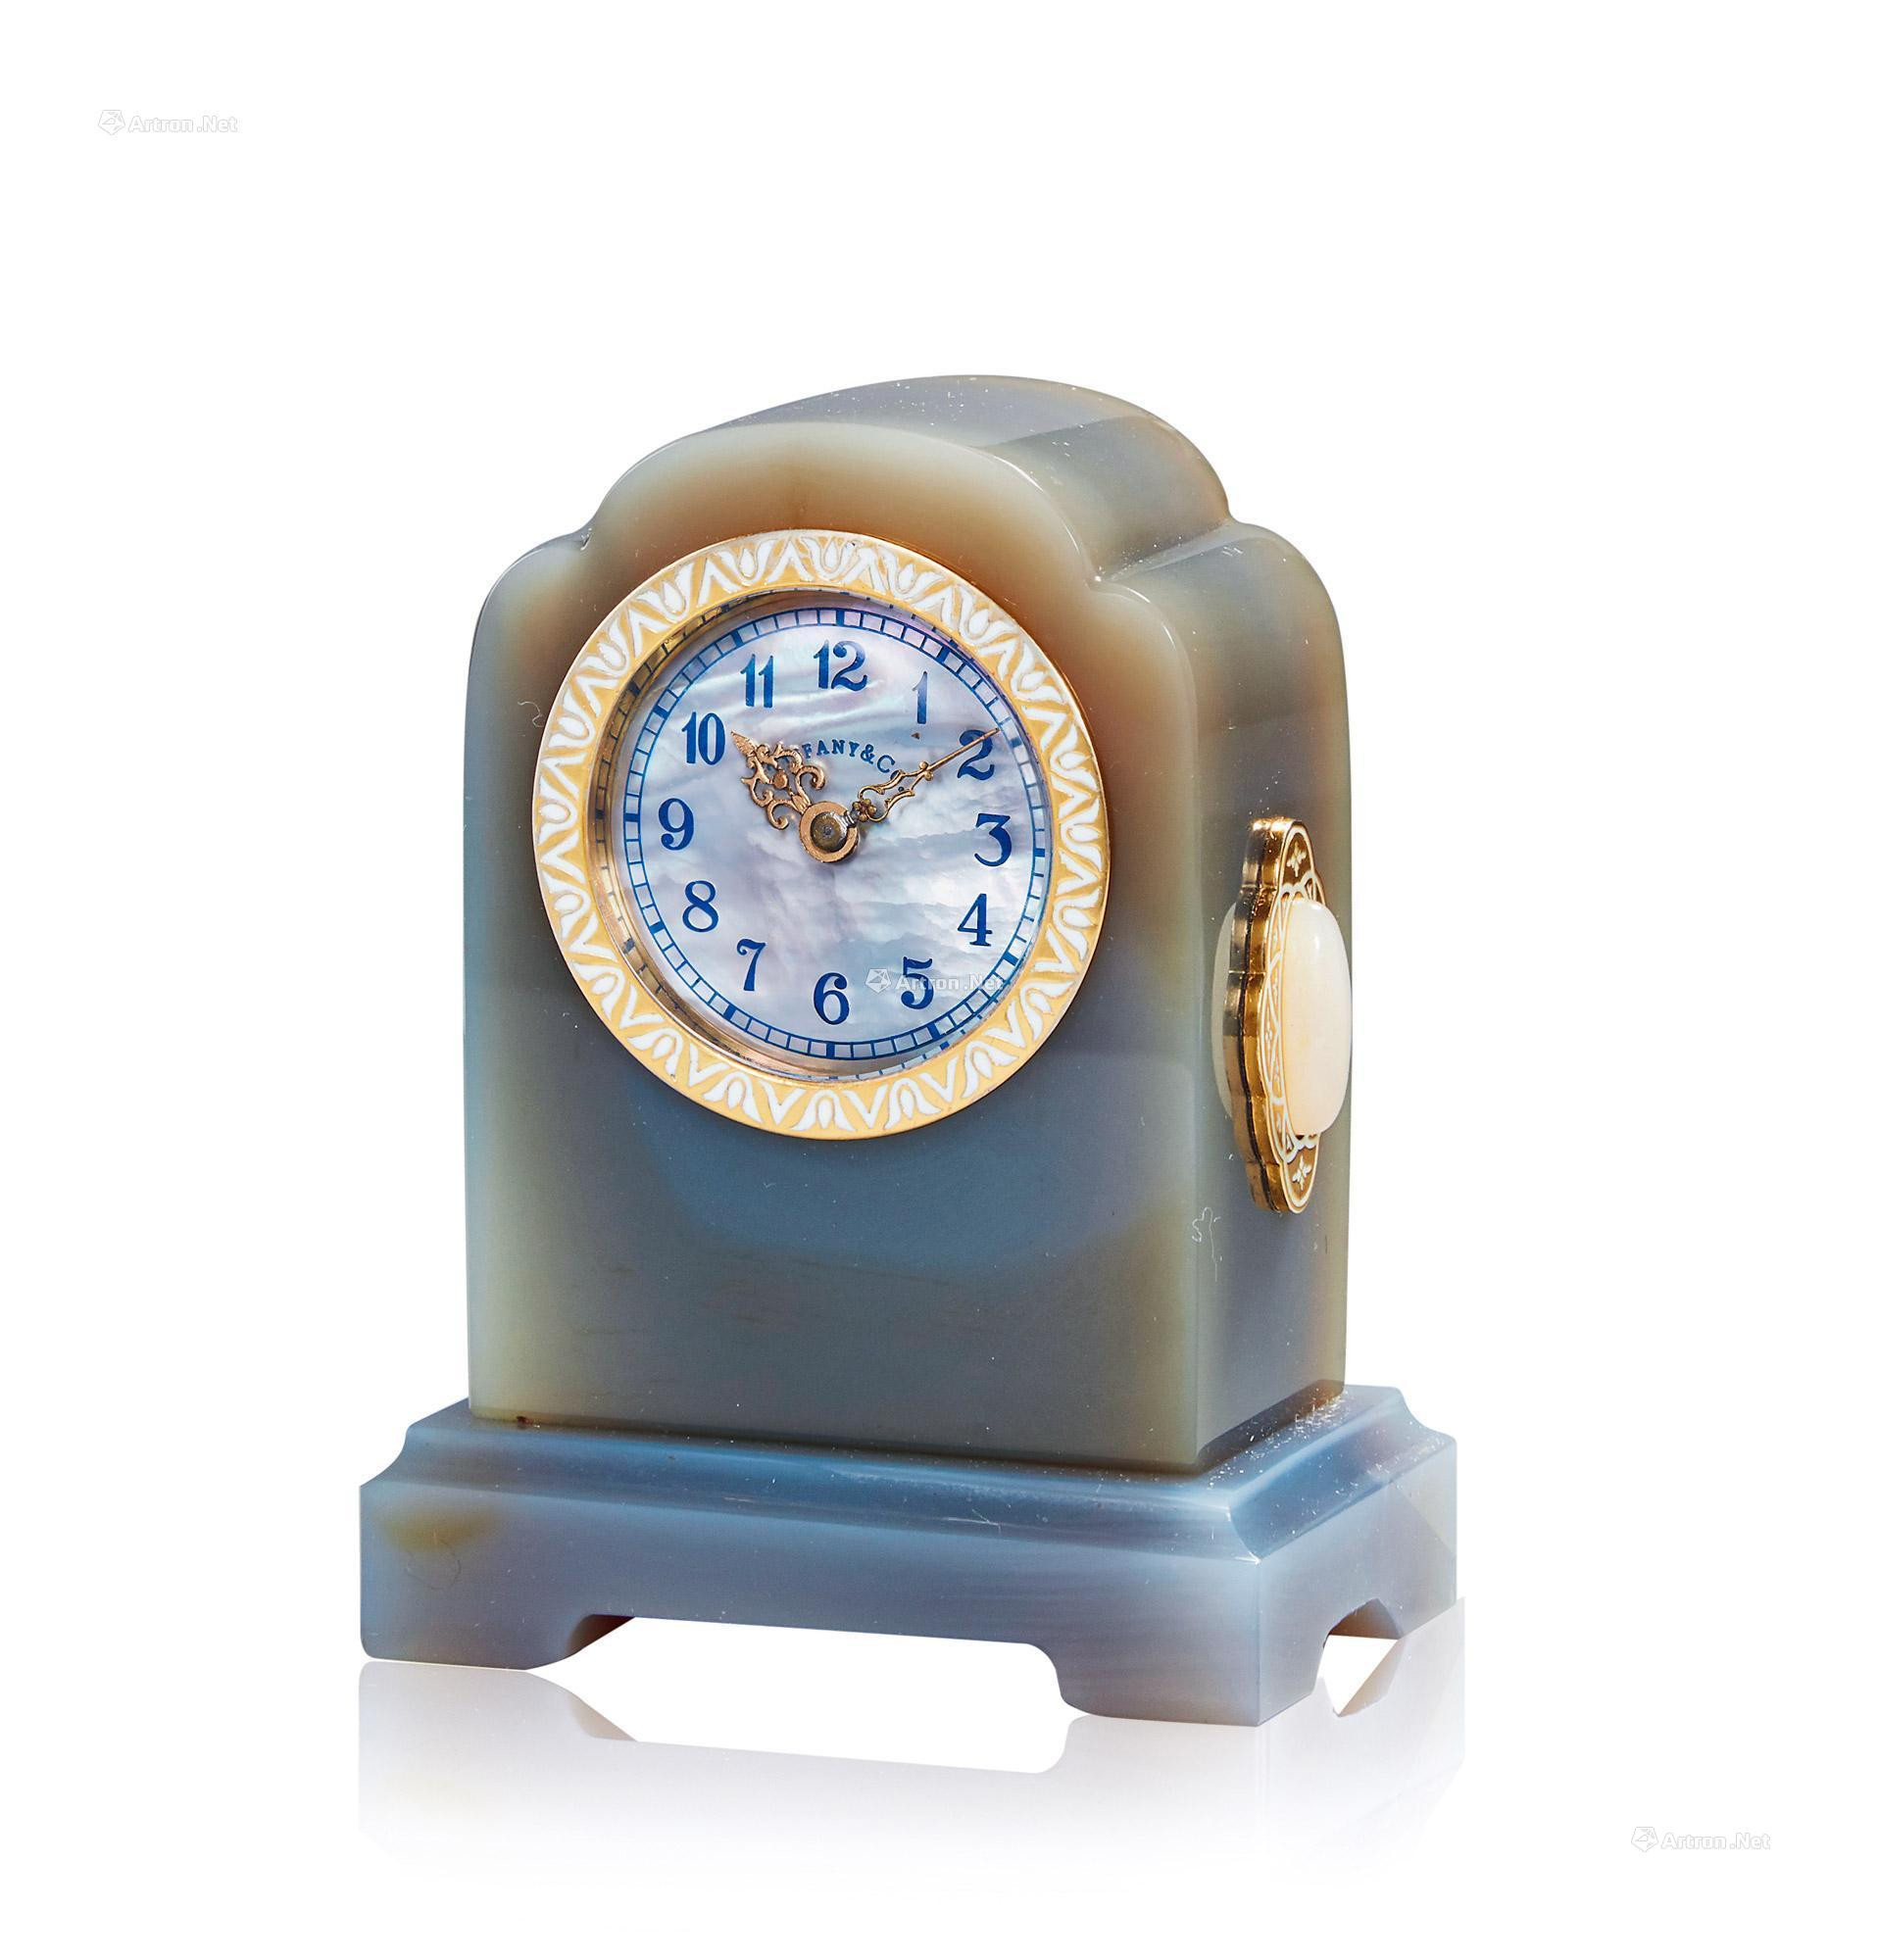 TIFFANY & CO. AN ART DECO AGATE MANUALLY-WOUND TABLE CLOCK WITH KEY AND MOTHER-OF-PEARL DIAL